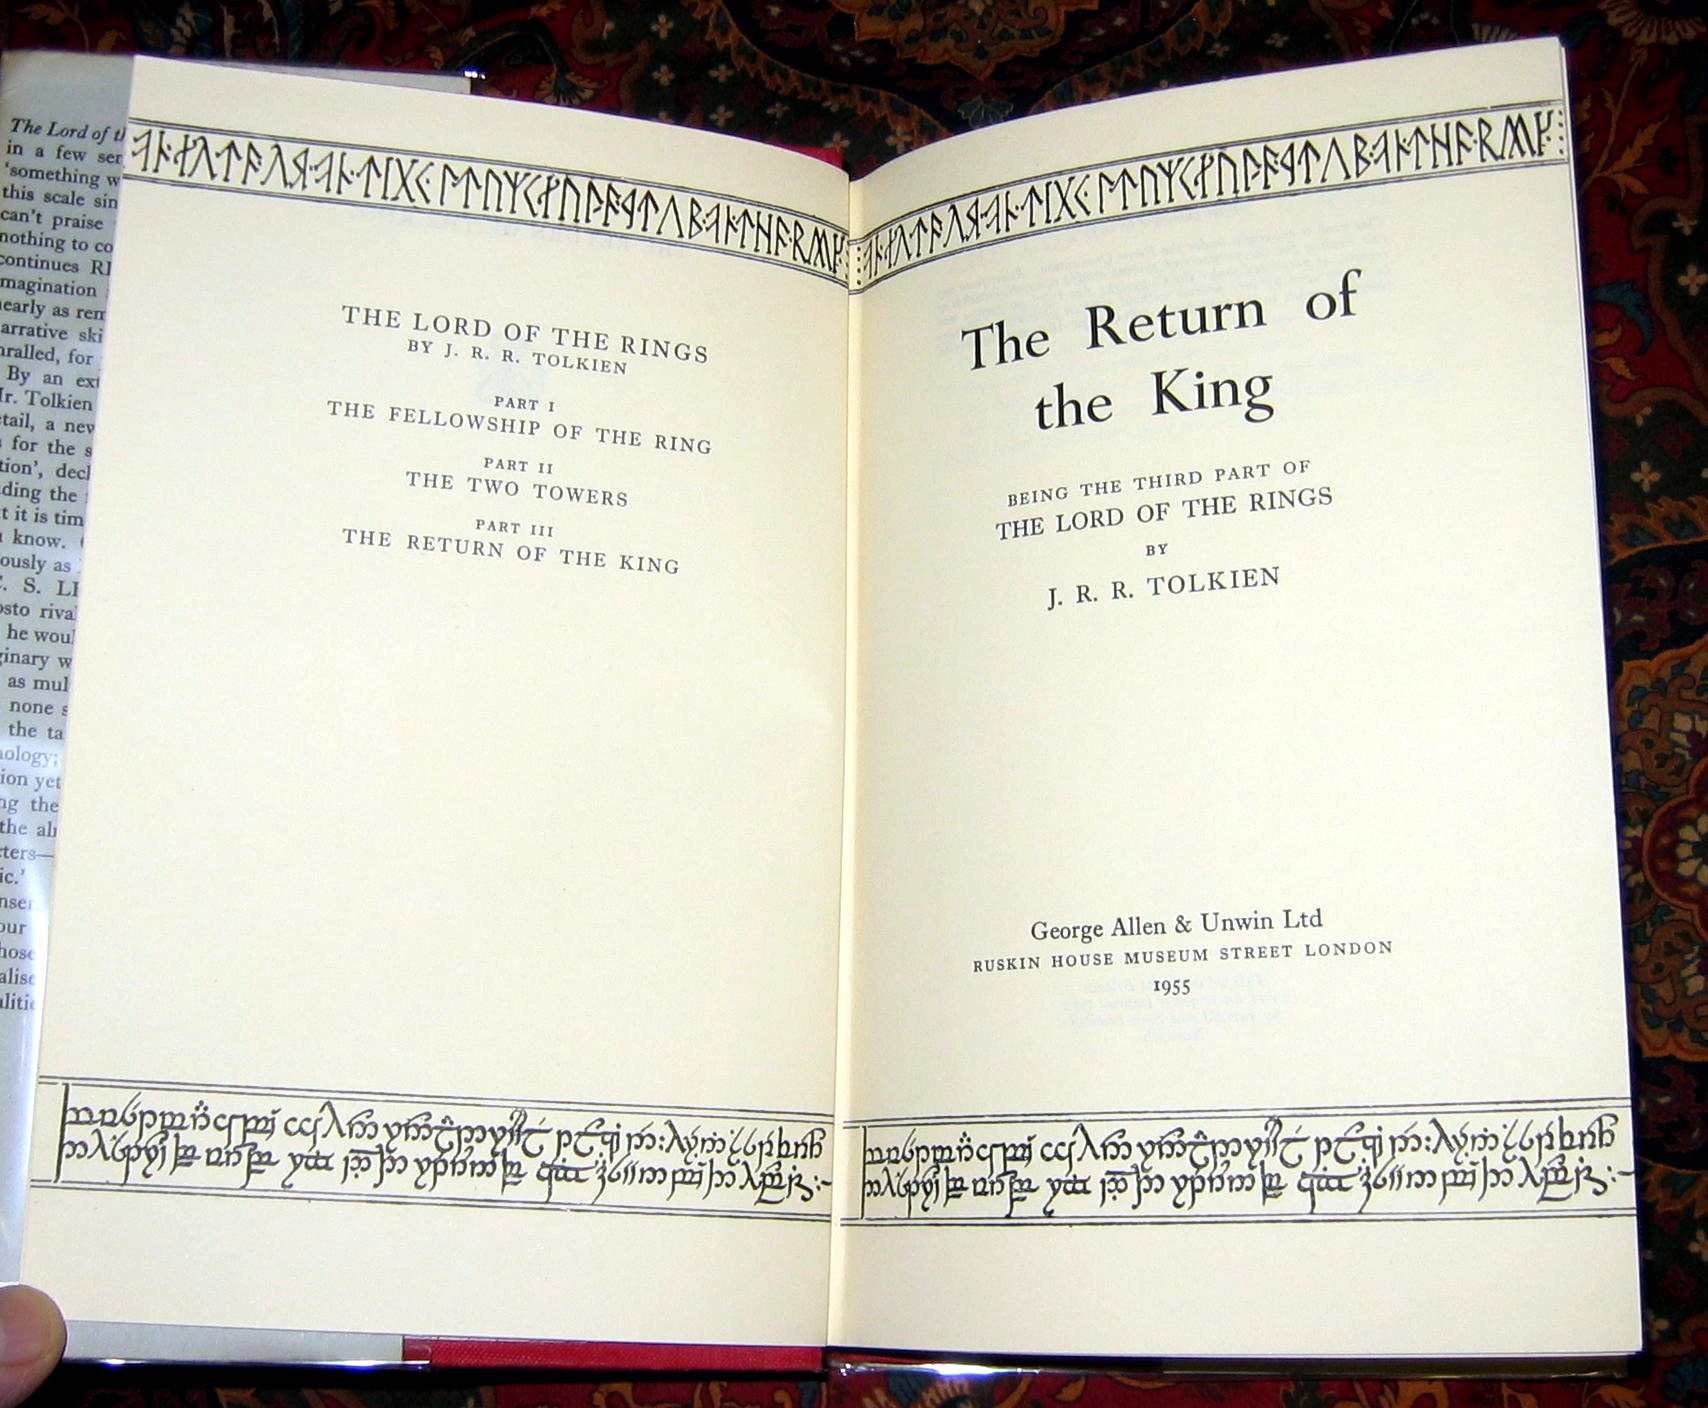 The Return of the King - 1st UK Edition, 1st impression, the later state with the slipped type and signature mark '4' on page 49, as per Wayne Hammond's revised opinion.